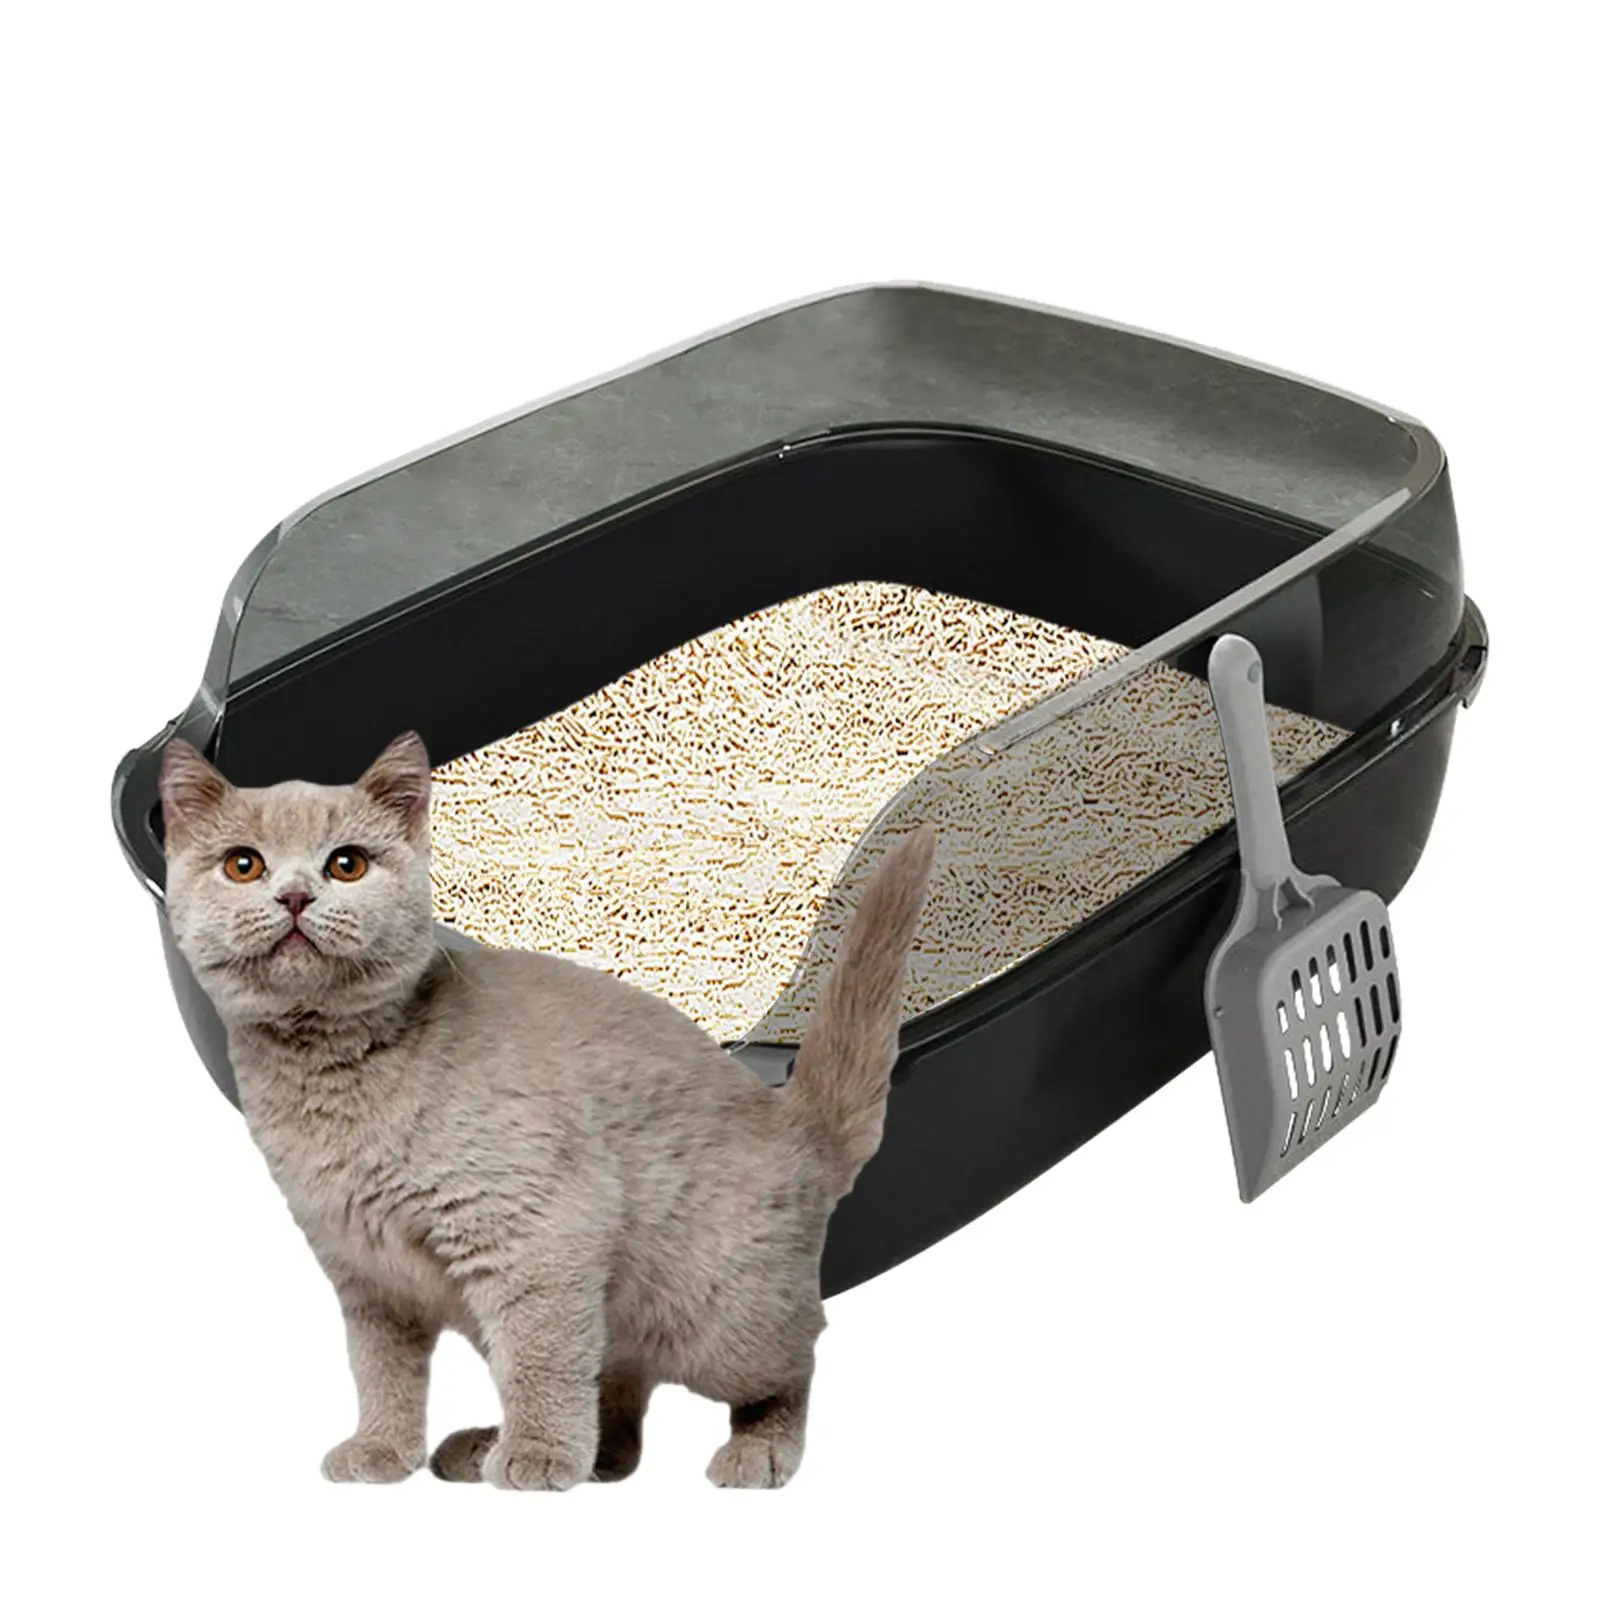 Cat Litter Box Semi Enclosed Tall Spray Shield Detachable Supplies Easy to Clean Bedpan Plastic Sturdy Cat Litter Tray Kitty